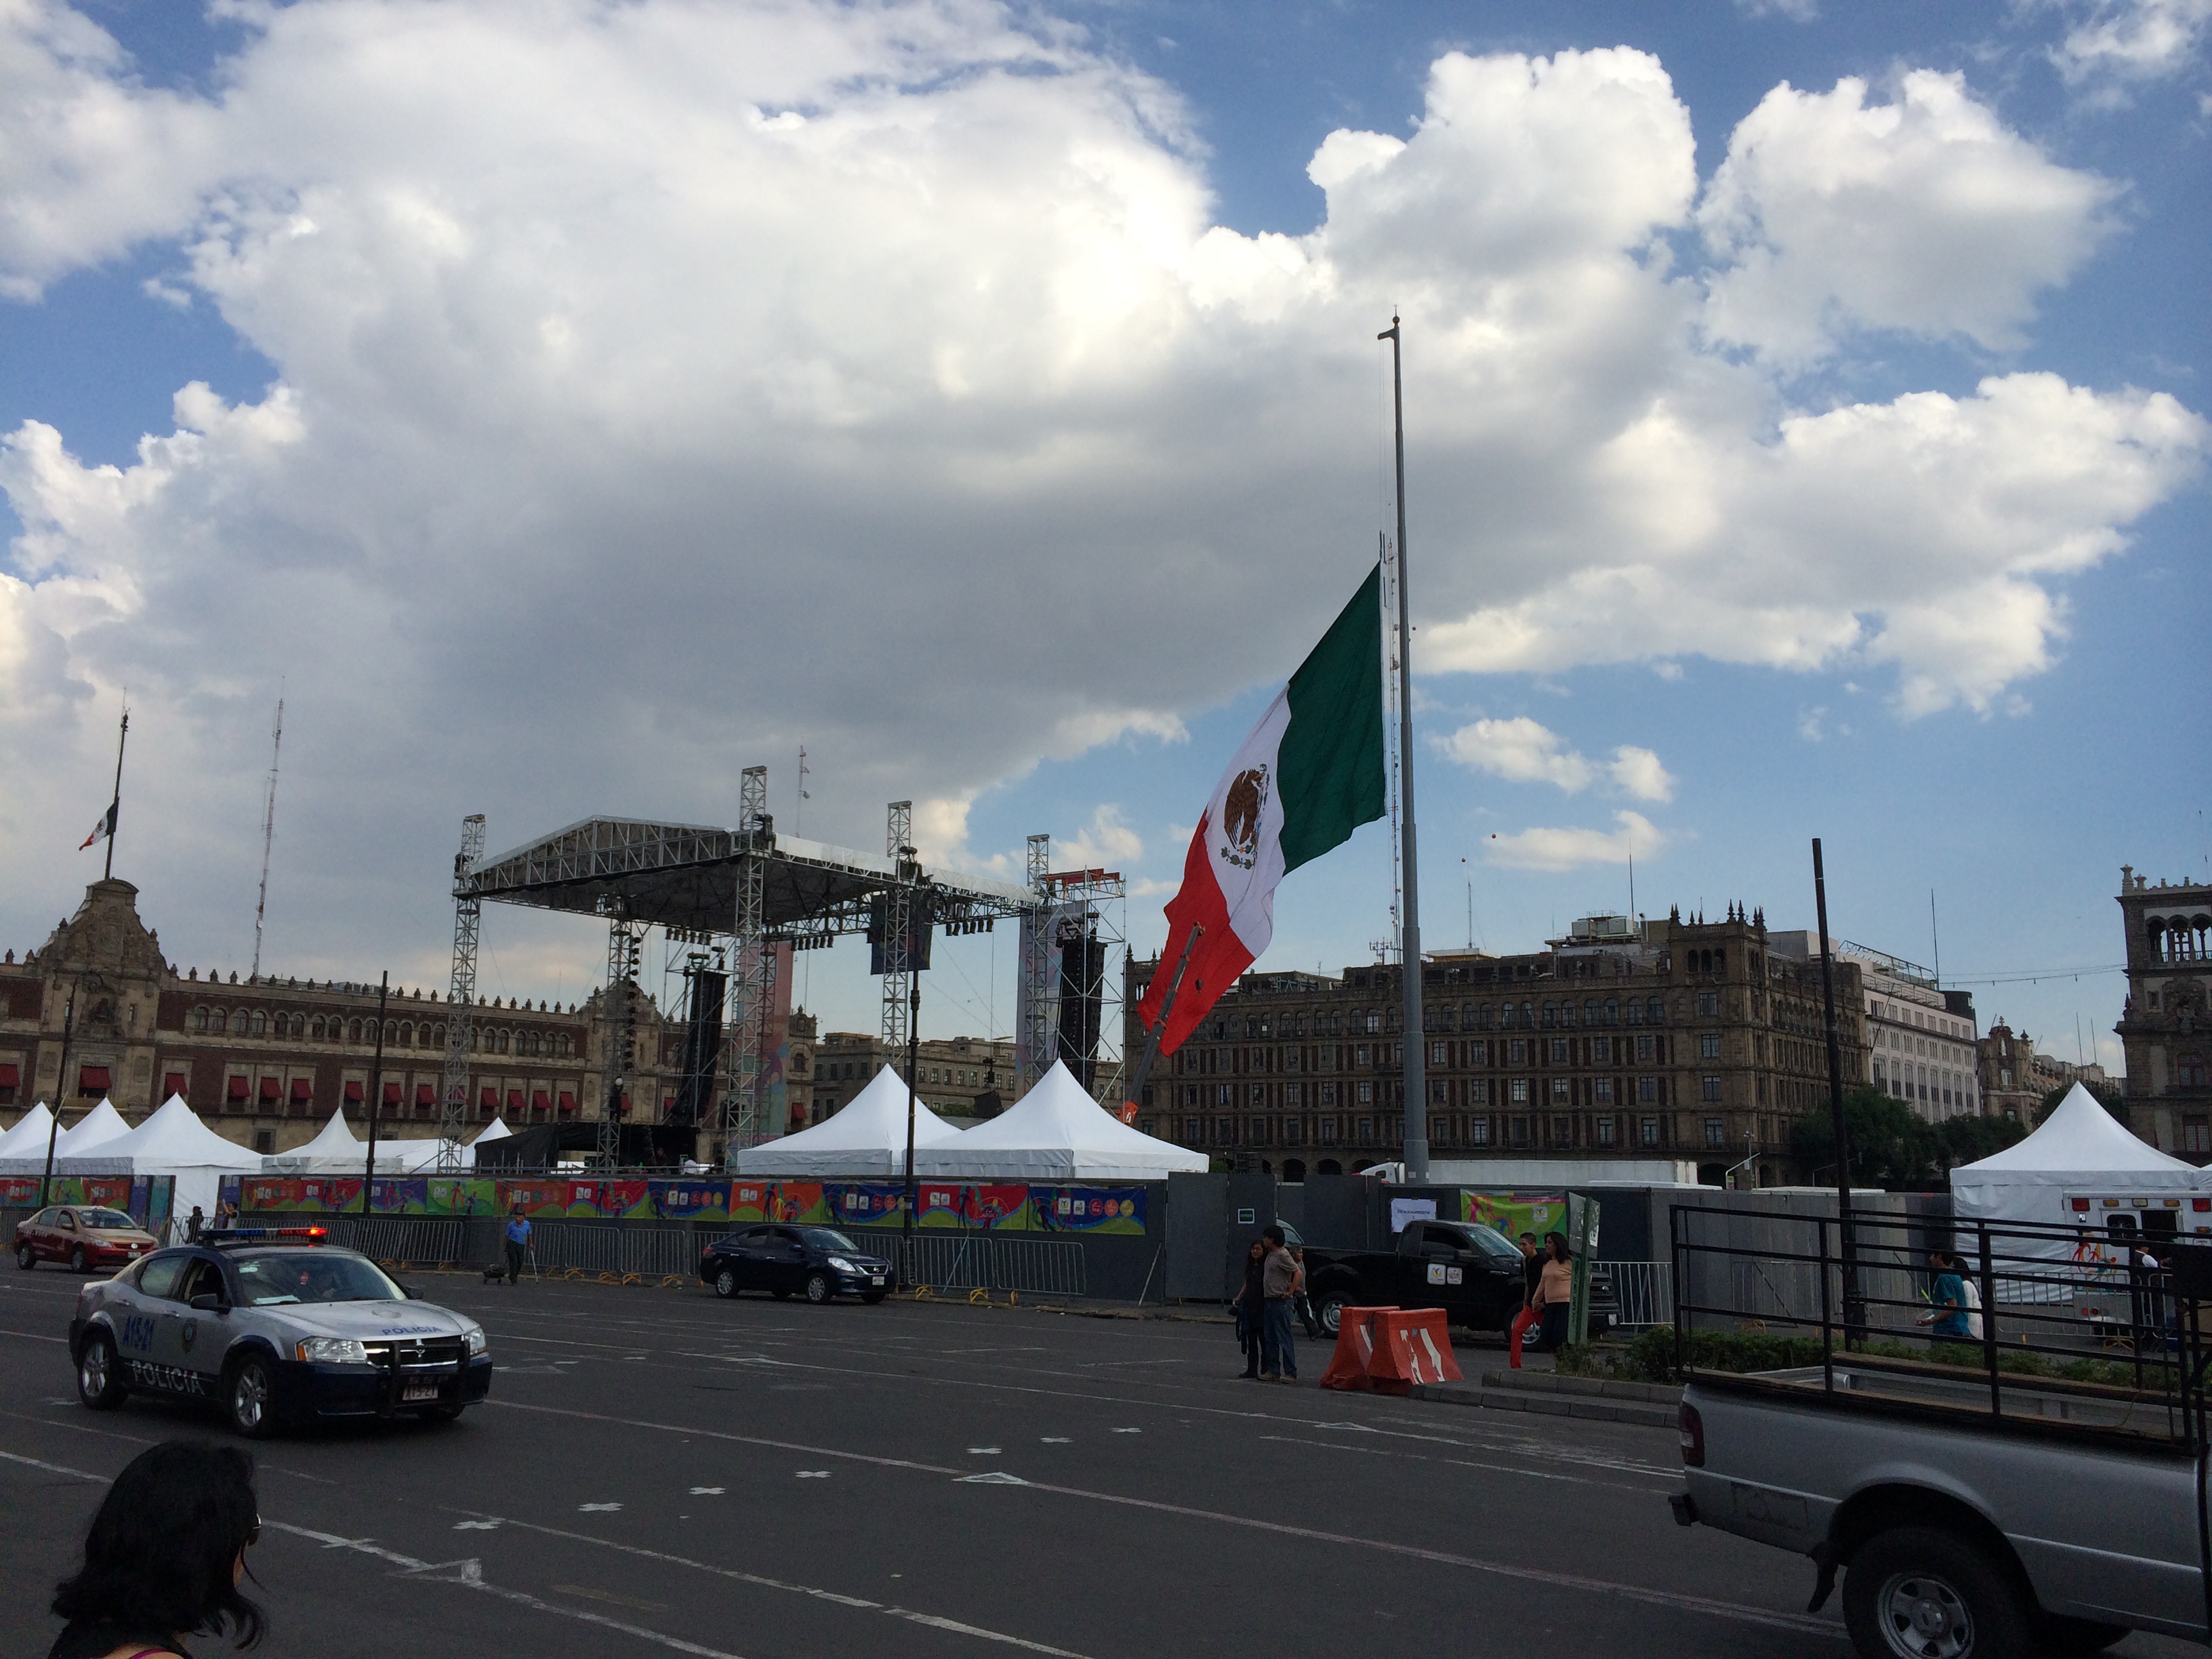 The Zocalo - Mexico City's center with the National Palace in the background